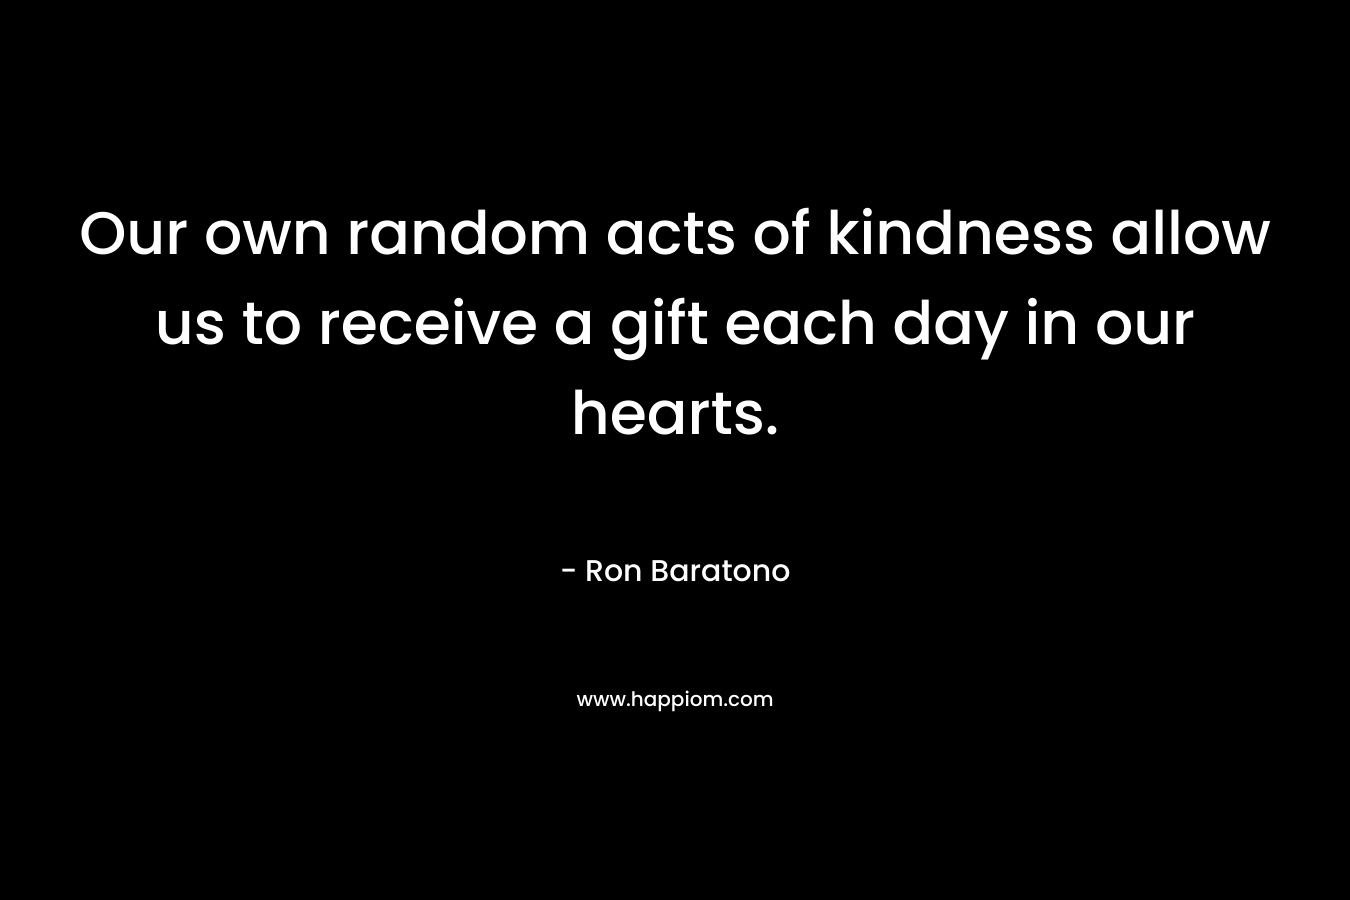 Our own random acts of kindness allow us to receive a gift each day in our hearts.